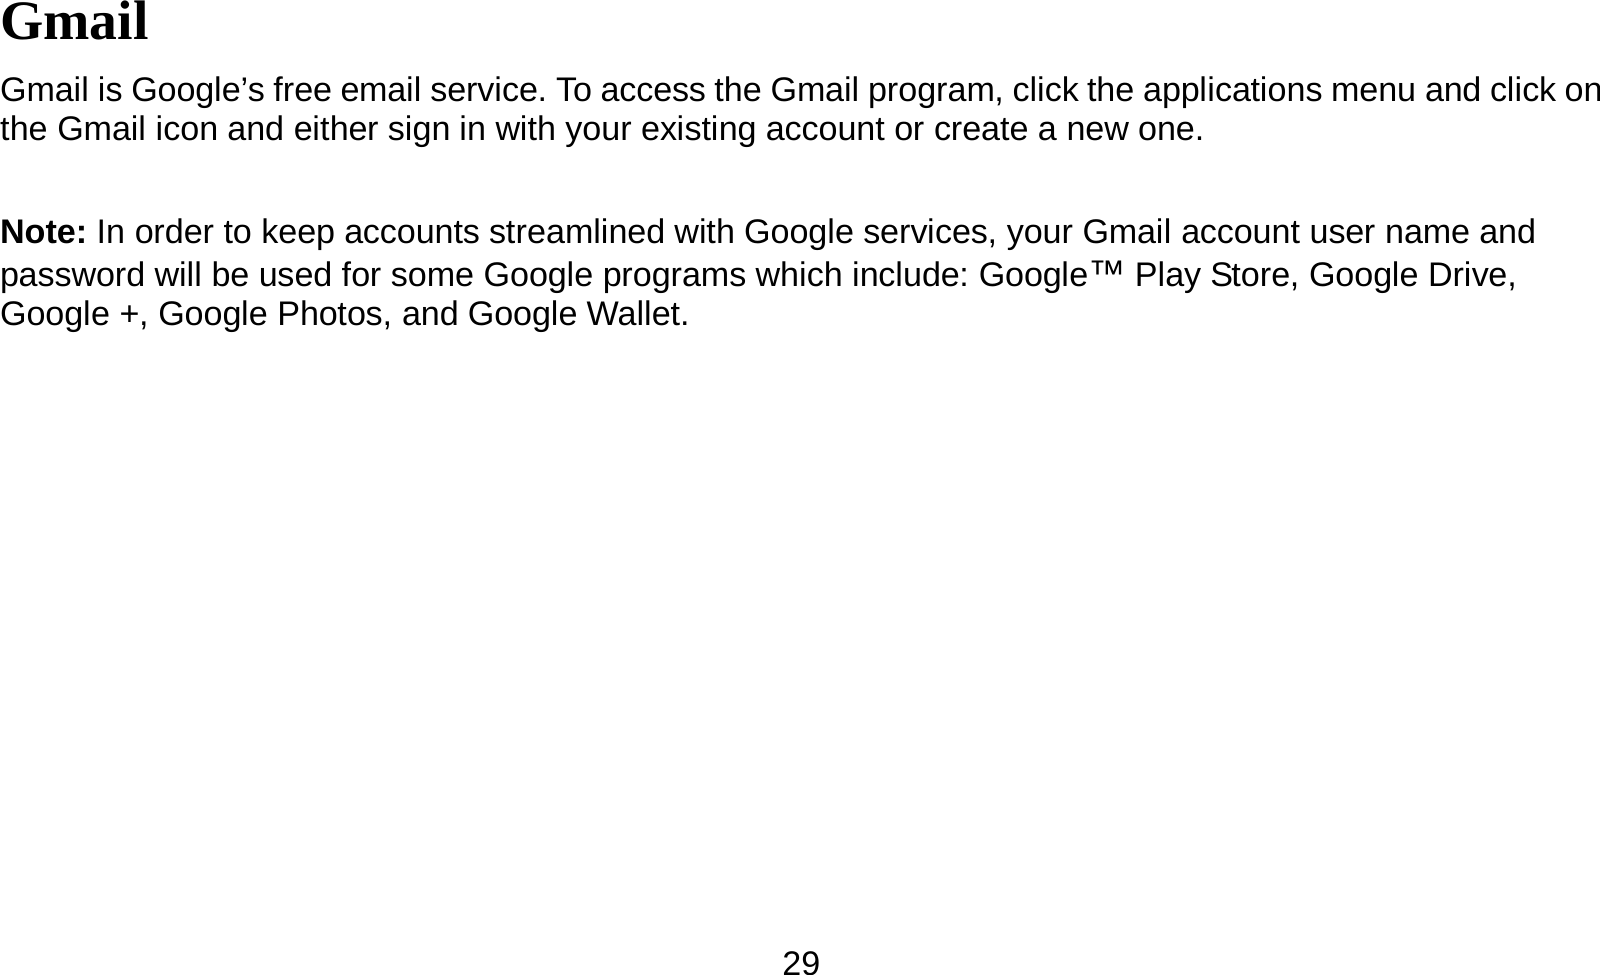   29Gmail Gmail is Google’s free email service. To access the Gmail program, click the applications menu and click on the Gmail icon and either sign in with your existing account or create a new one.    Note: In order to keep accounts streamlined with Google services, your Gmail account user name and password will be used for some Google programs which include: Google™ Play Store, Google Drive, Google +, Google Photos, and Google Wallet.   